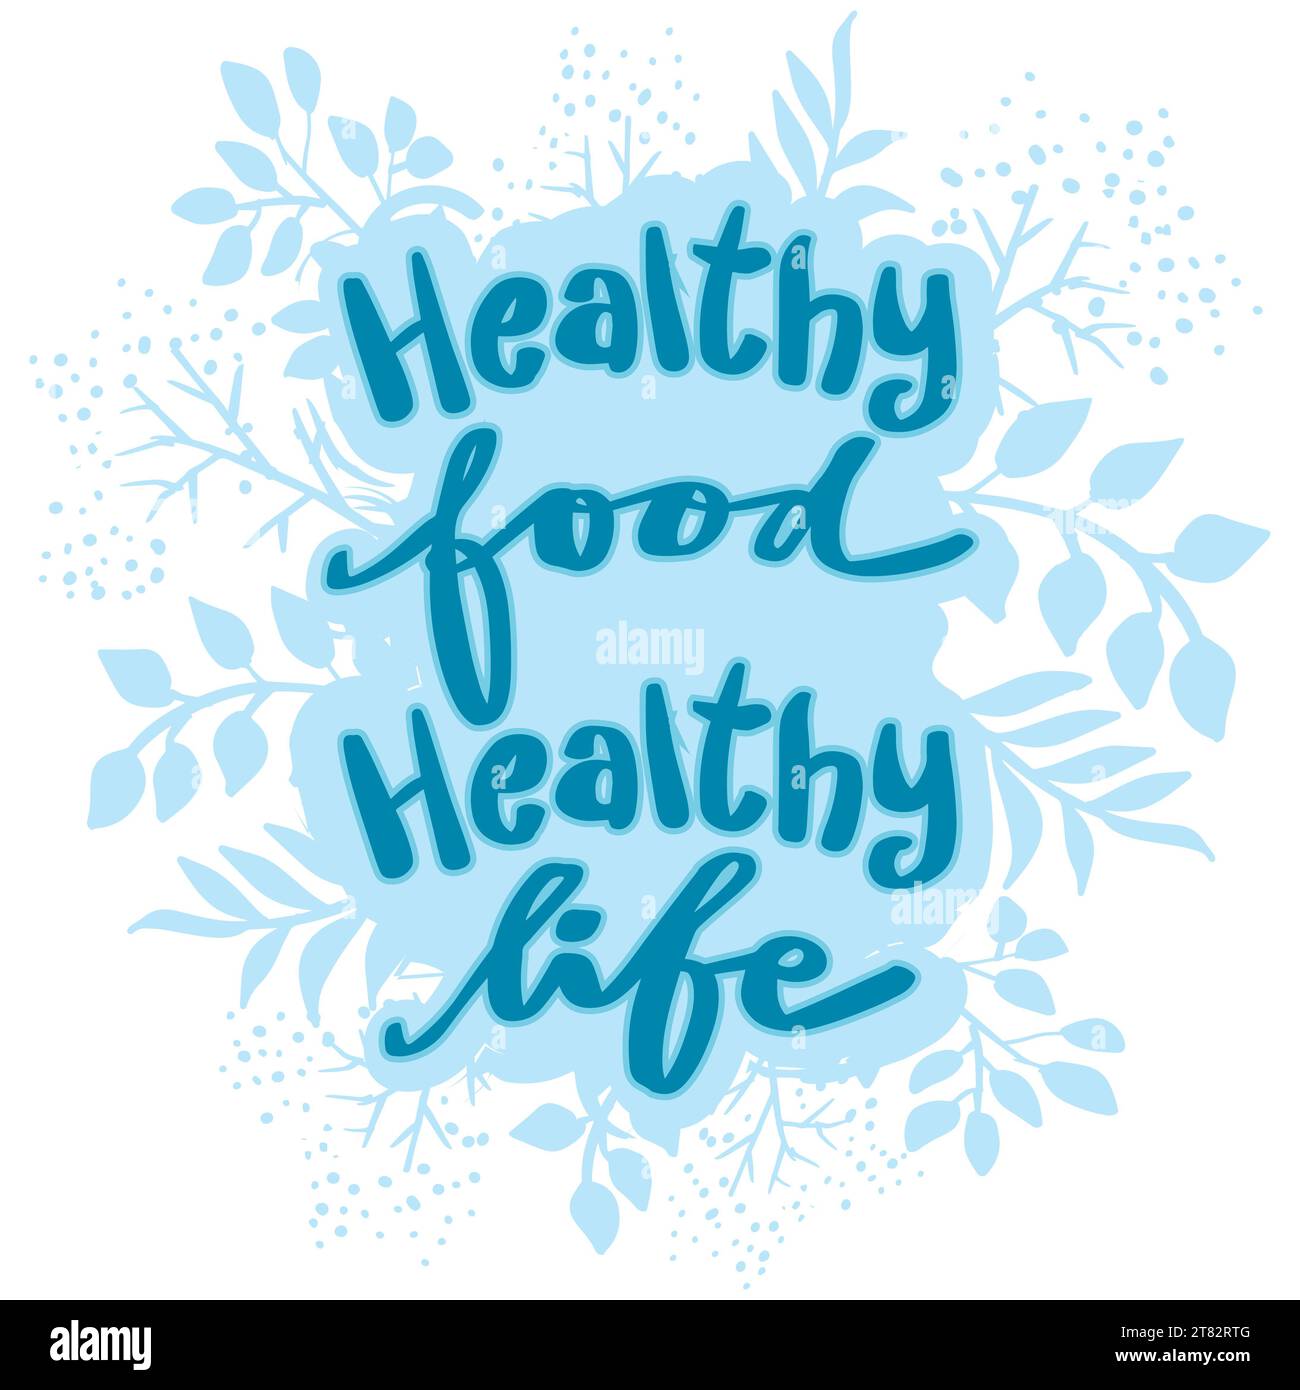 Healthy food, healthy life lettering. Motivational quote. Stock Photo